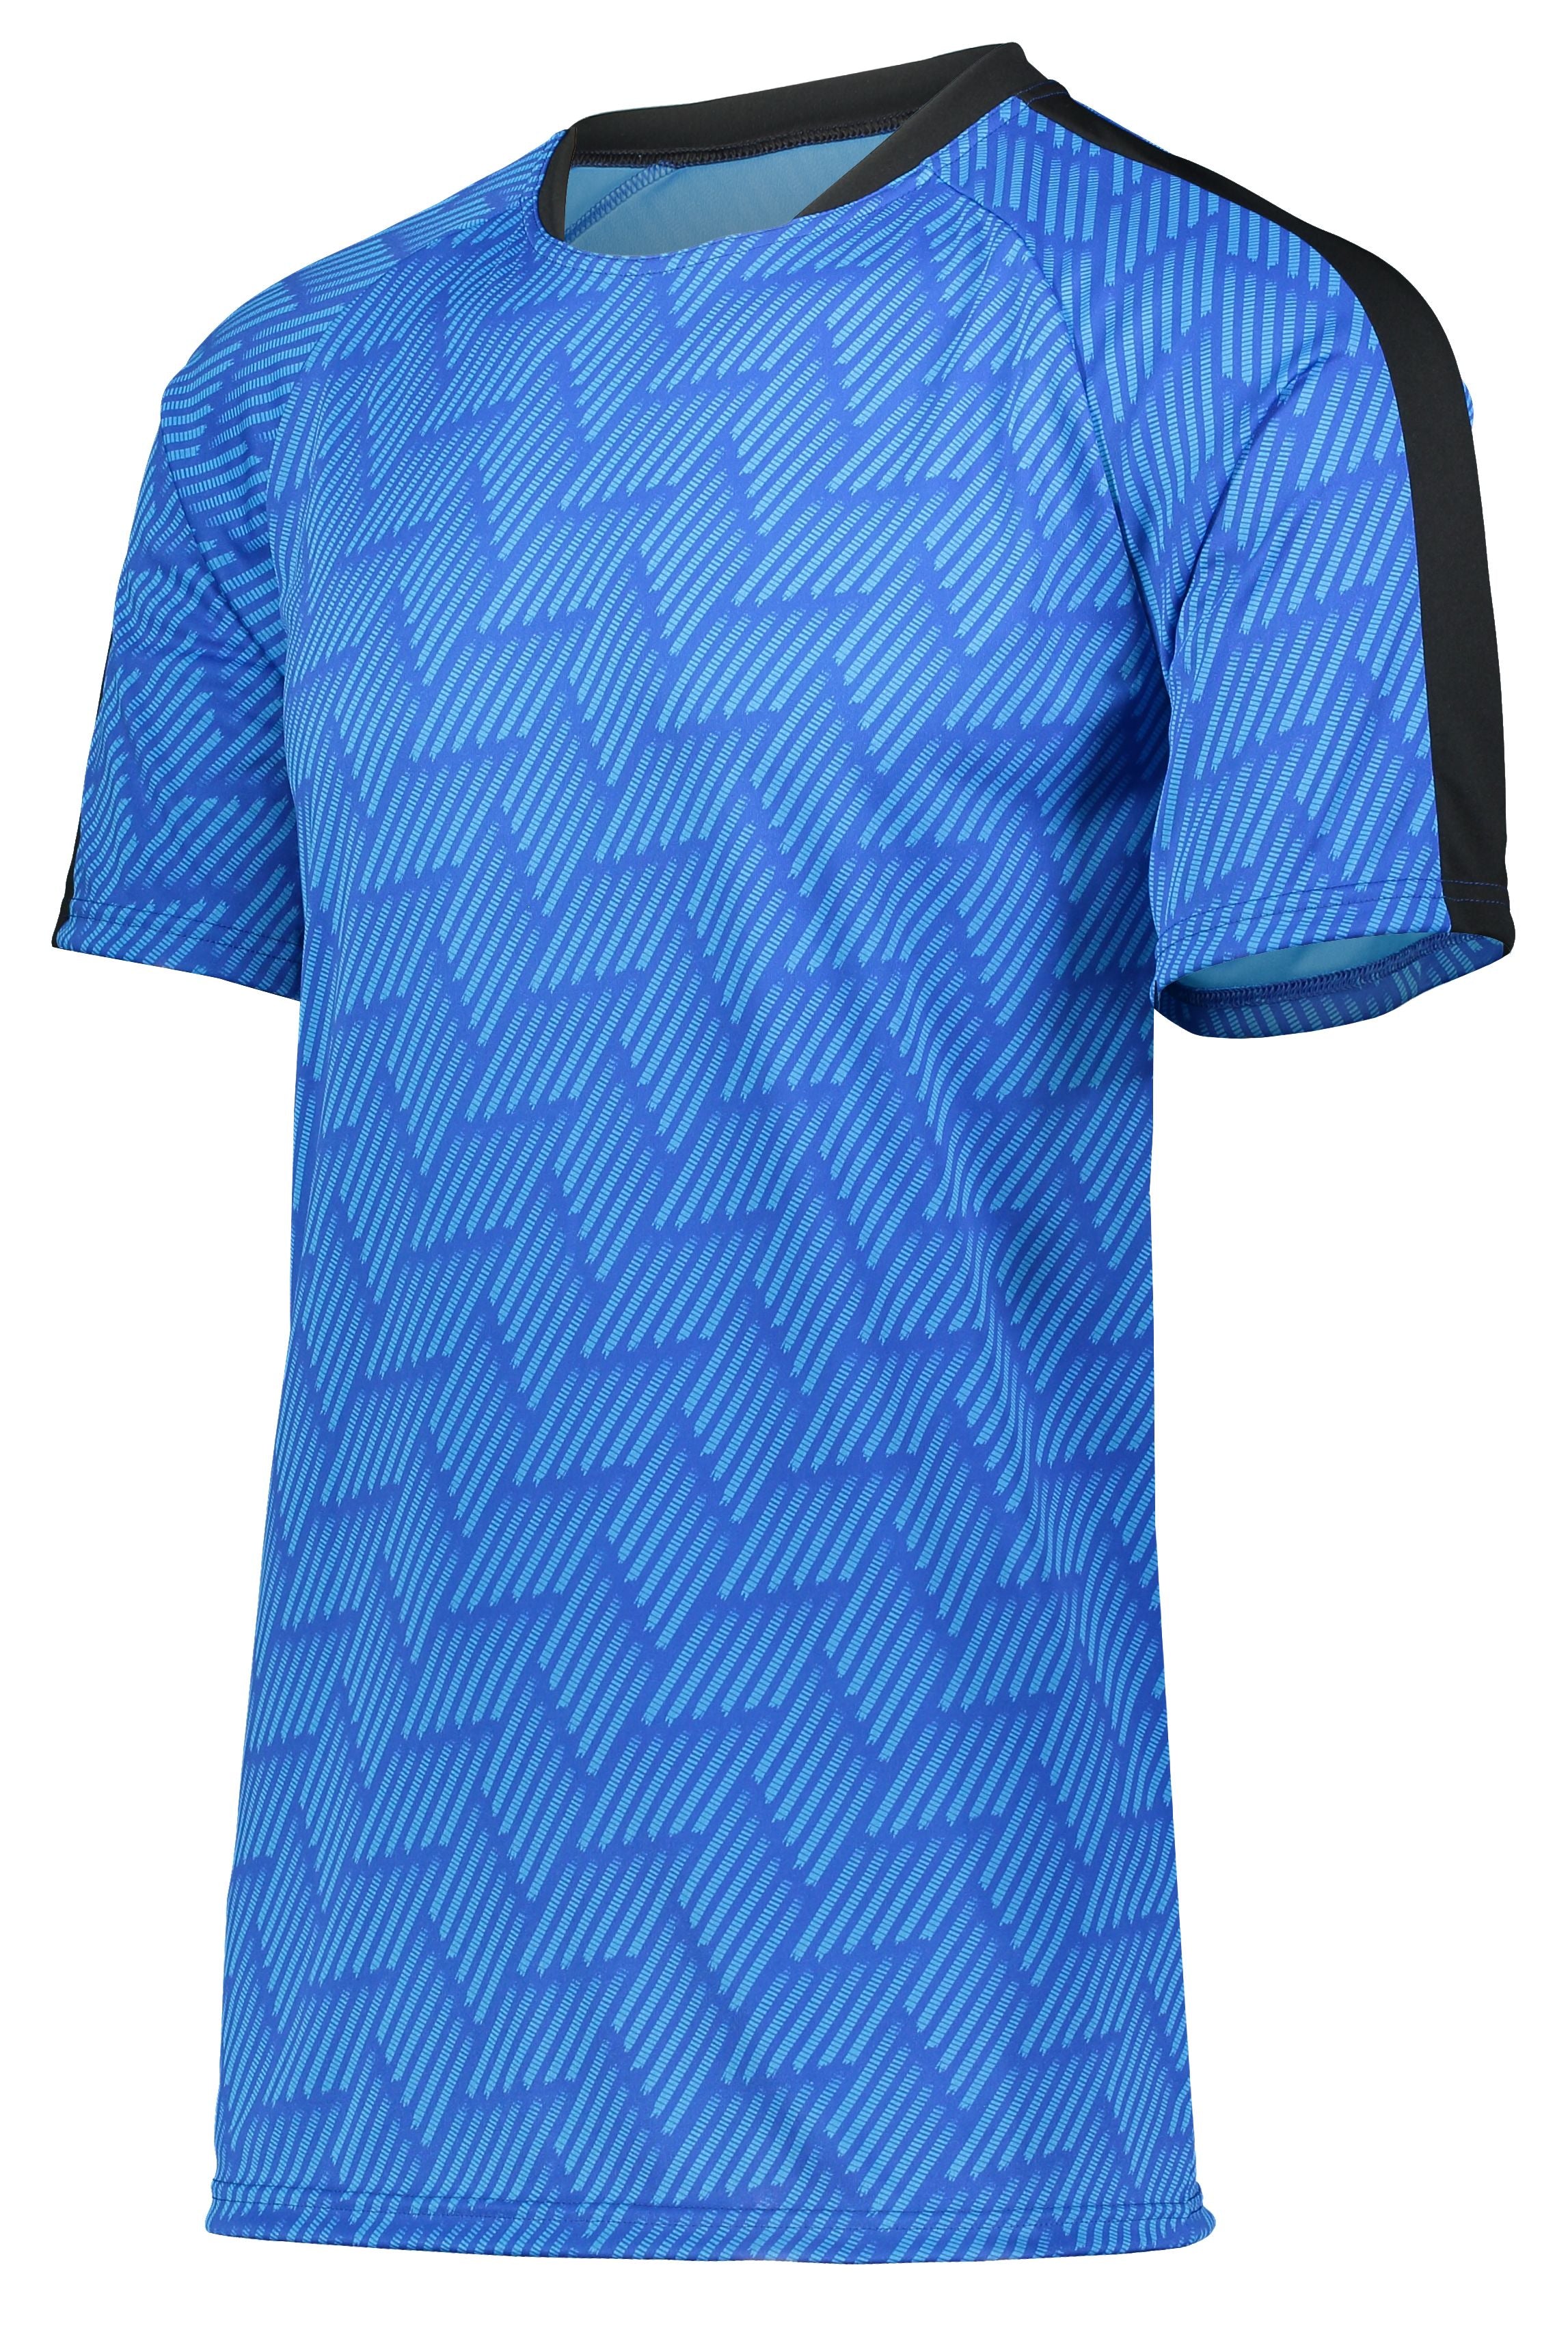 High 5 Youth Hypervolt Jersey in Royal Print/Black  -Part of the Youth, Youth-Jersey, High5-Products, Soccer, Shirts, All-Sports-1 product lines at KanaleyCreations.com